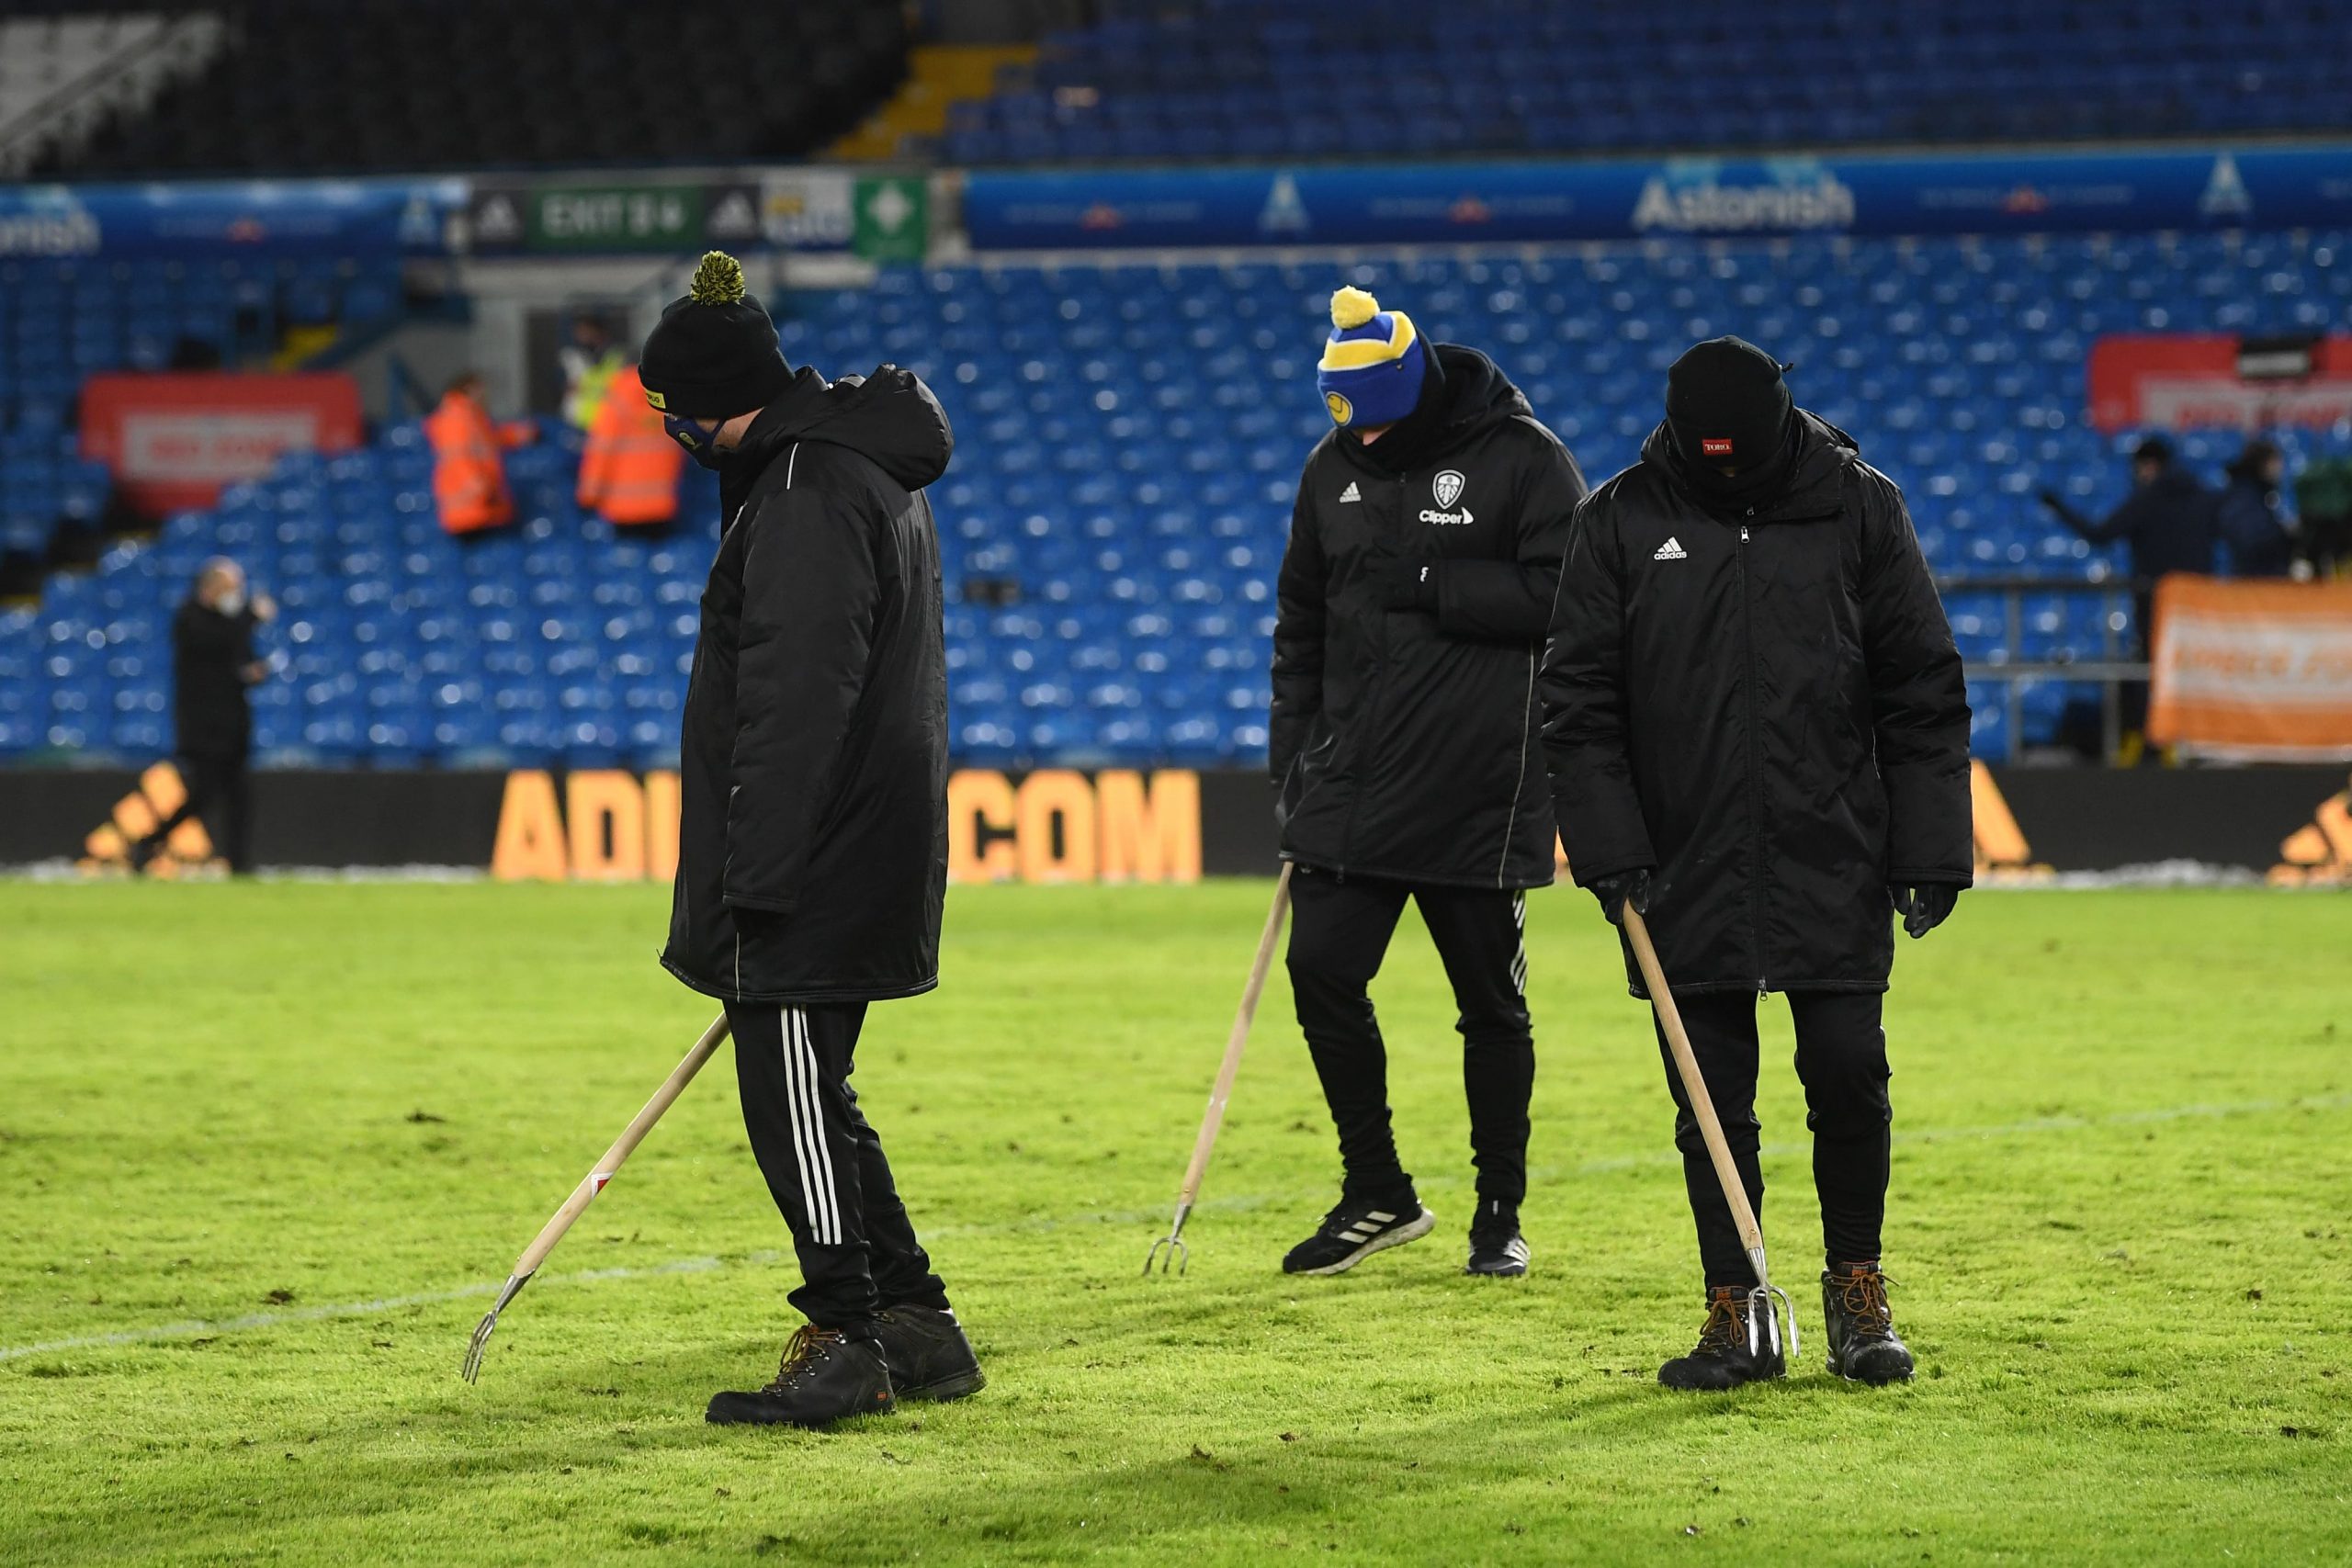 Tottenham Hotspur help Leeds United with their pitch problem this season by letting them use their turf. (GETTY Images)